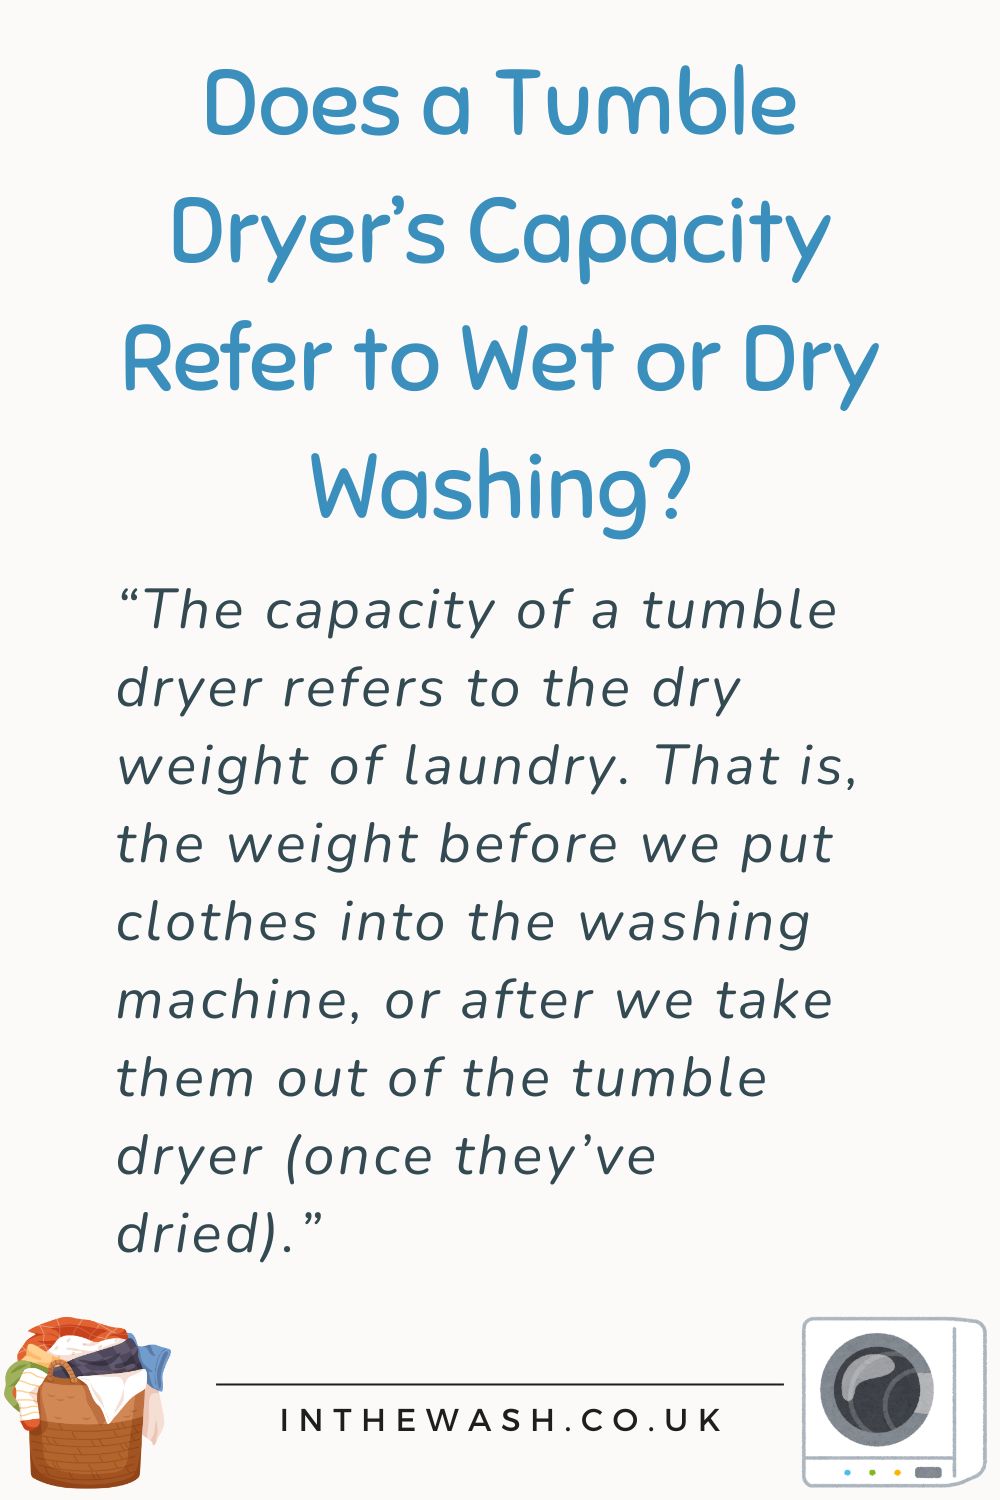 Does a Tumble Dryer’s Capacity Refer to Wet or Dry Washing?